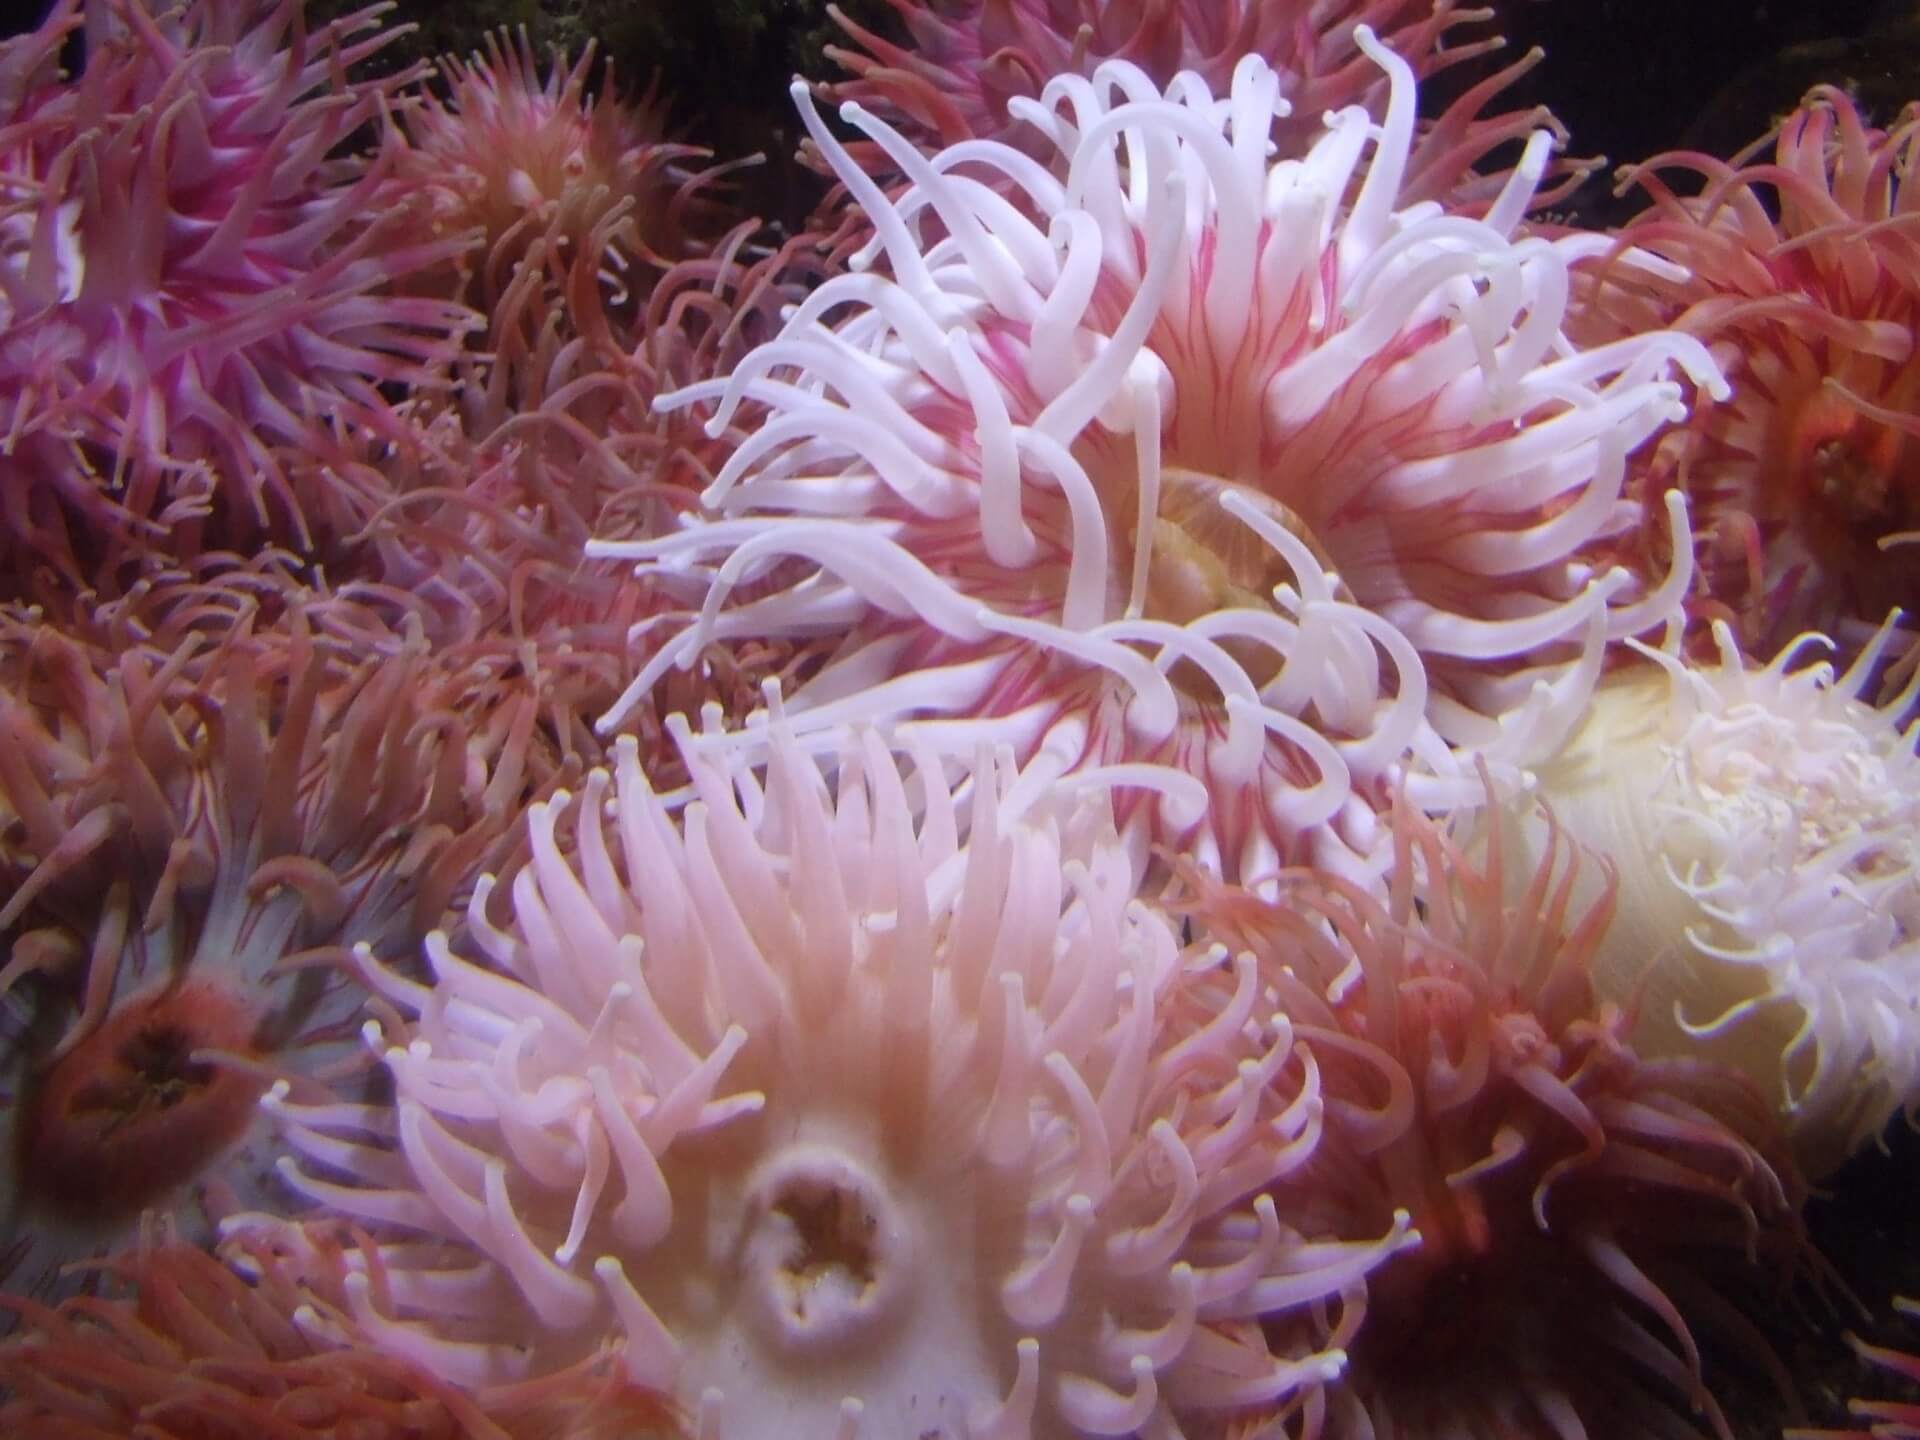 Image of a group of recently split anemones